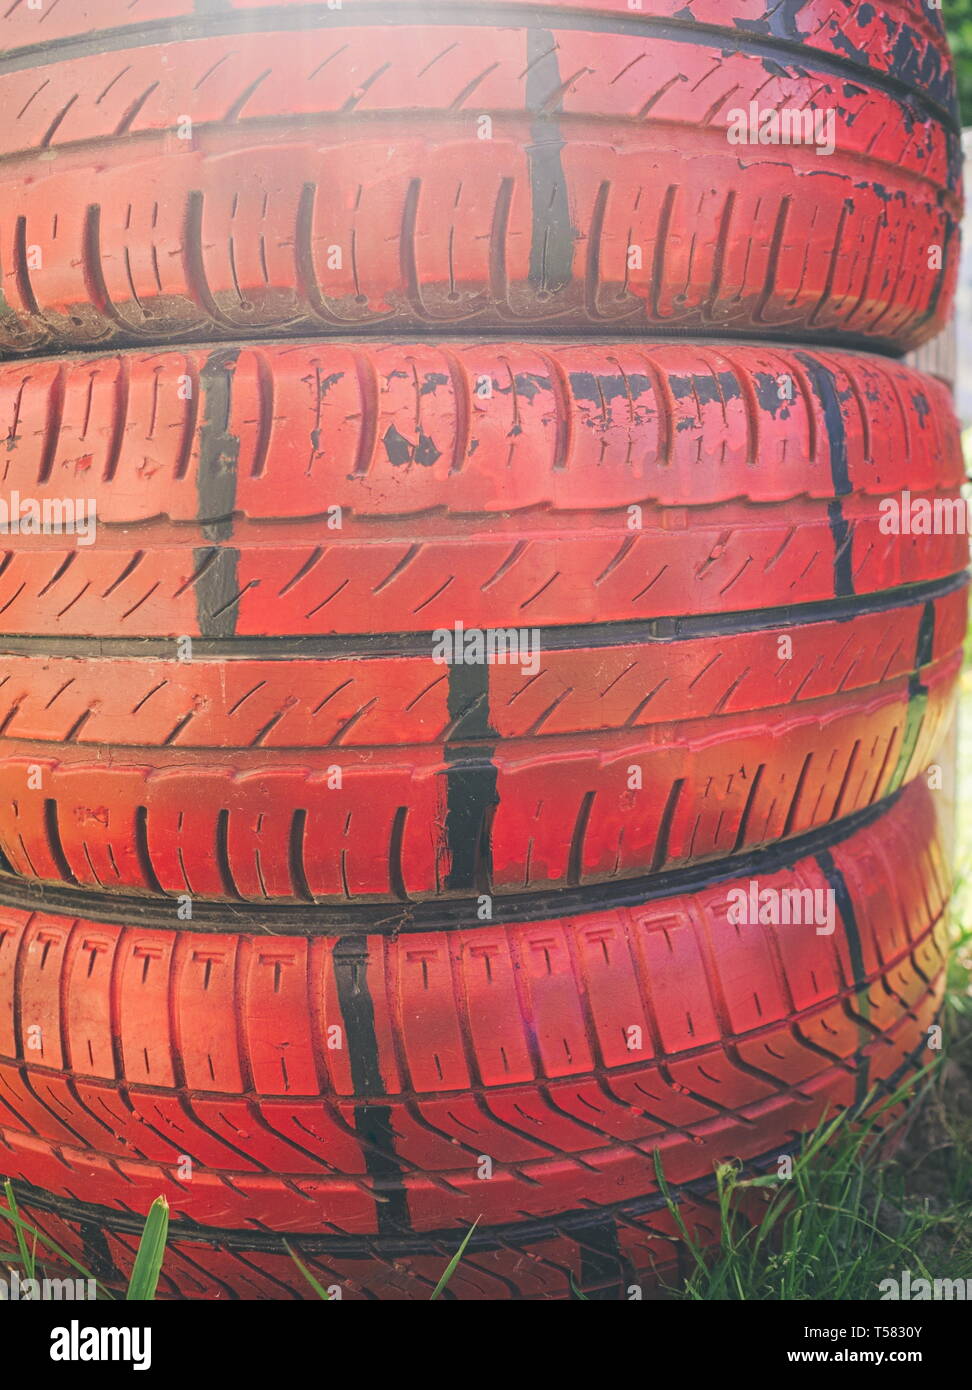 Red Painted Car Tires in the Garden Closeup Stock Photo